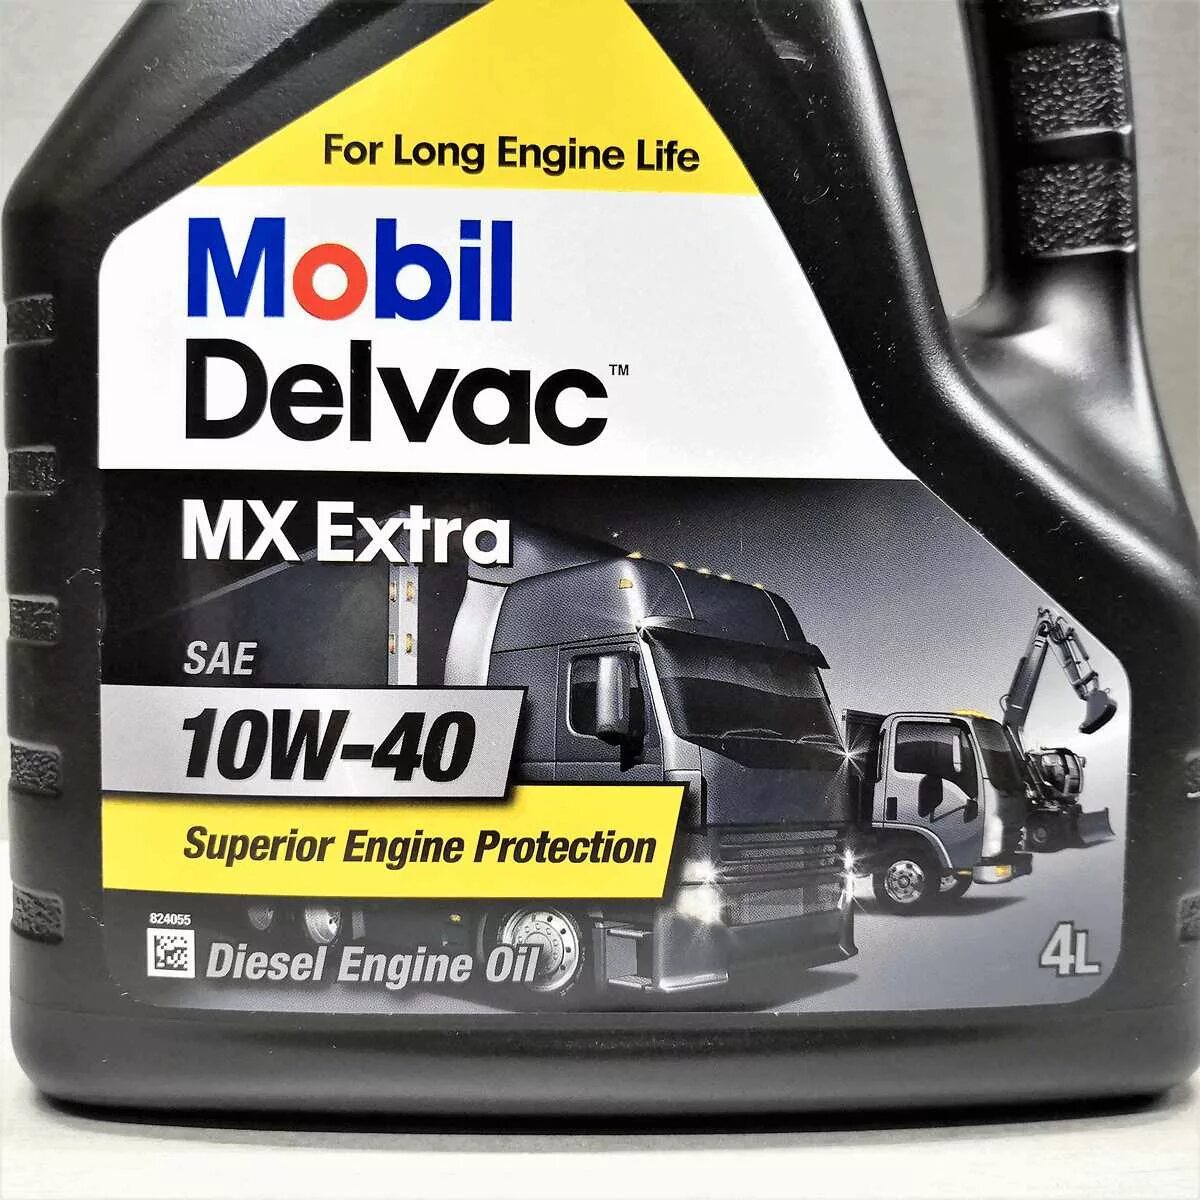 Масло mobil extra 10w 40. Мобил Делвак МХ Экстра 10w 40. Масло моторное mobil Delvac MX Extra 10w 40. Mobil Delvac MX Extra 10w 40 20 л 152673. Мобил Делвак 10w 40 4.